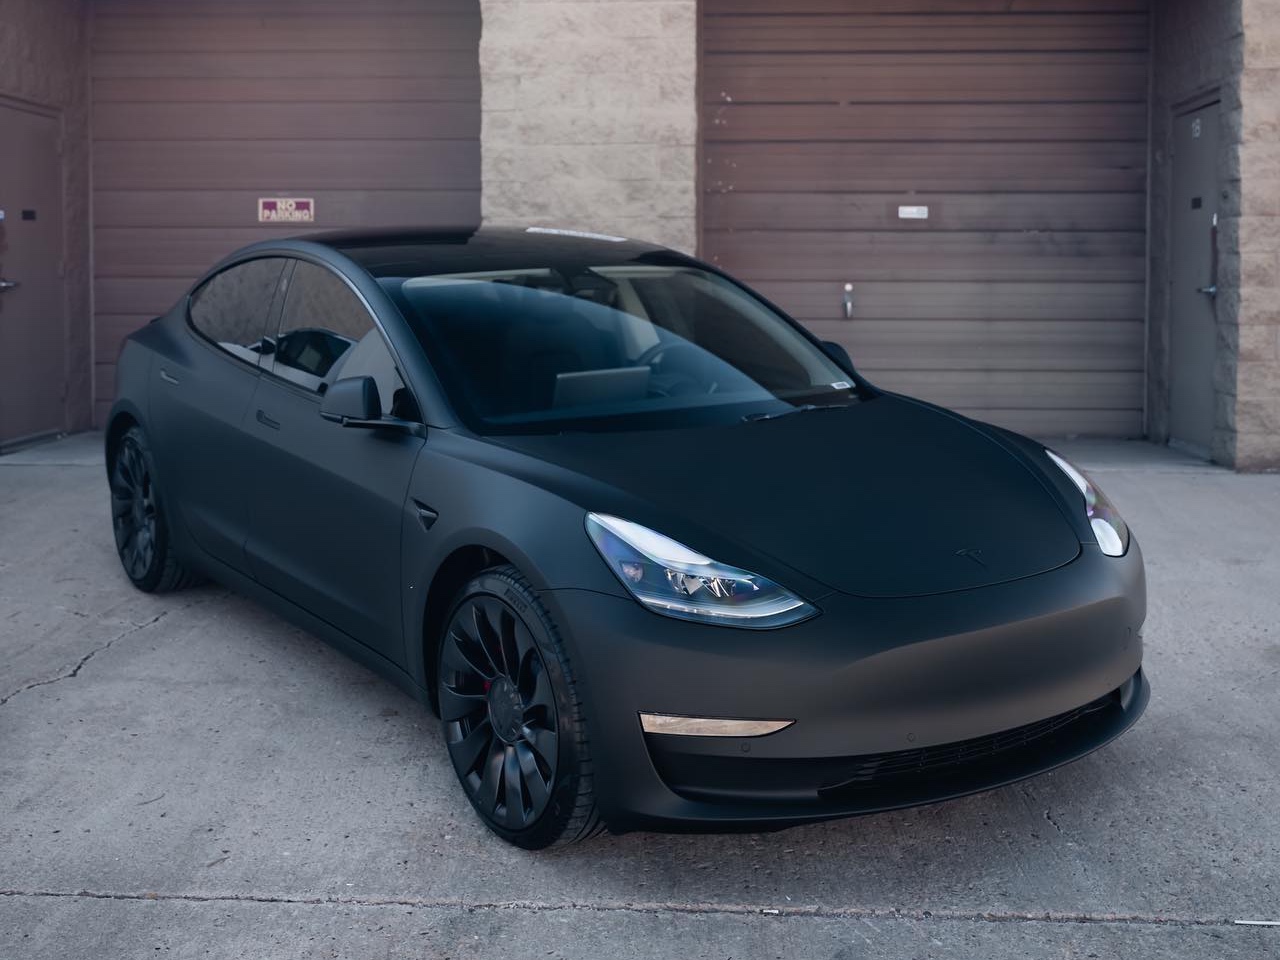 New photos of Tesla's Black Matte Model 3 are jaw-dropping